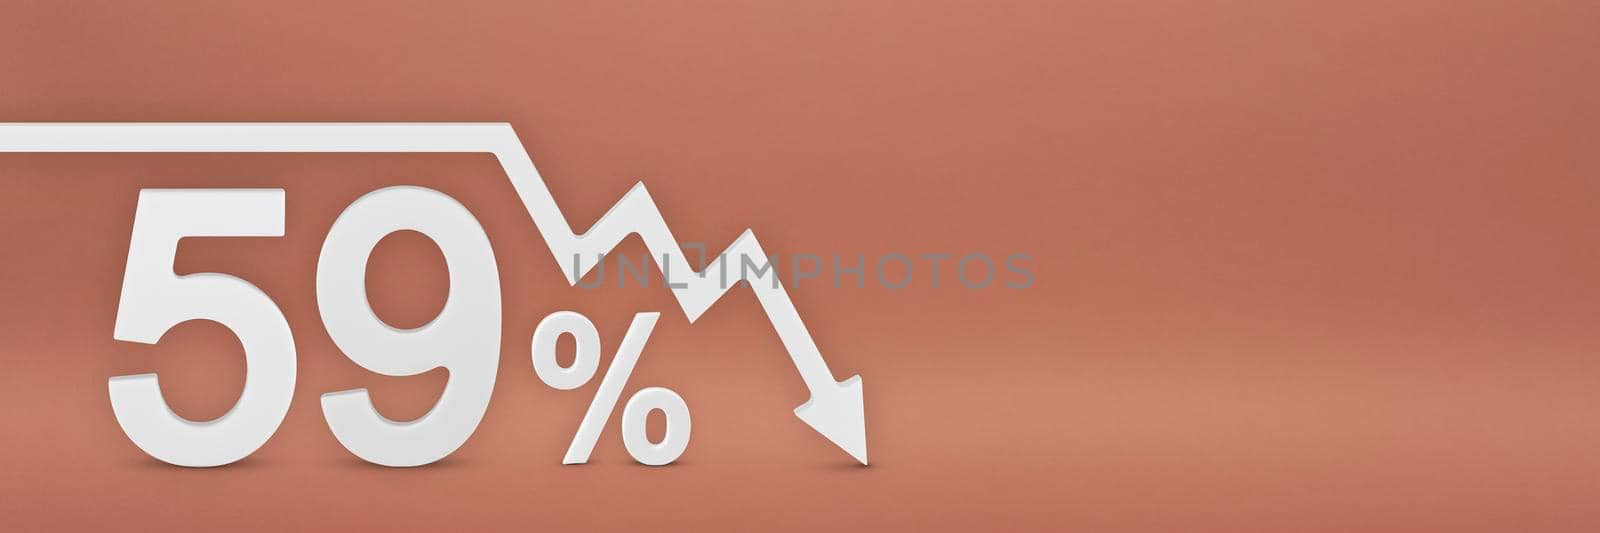 fifty-nine percent, the arrow on the graph is pointing down. Stock market crash, bear market, inflation.Economic collapse, collapse of stocks.3d banner,59 percent discount sign on a red background. by SERSOL